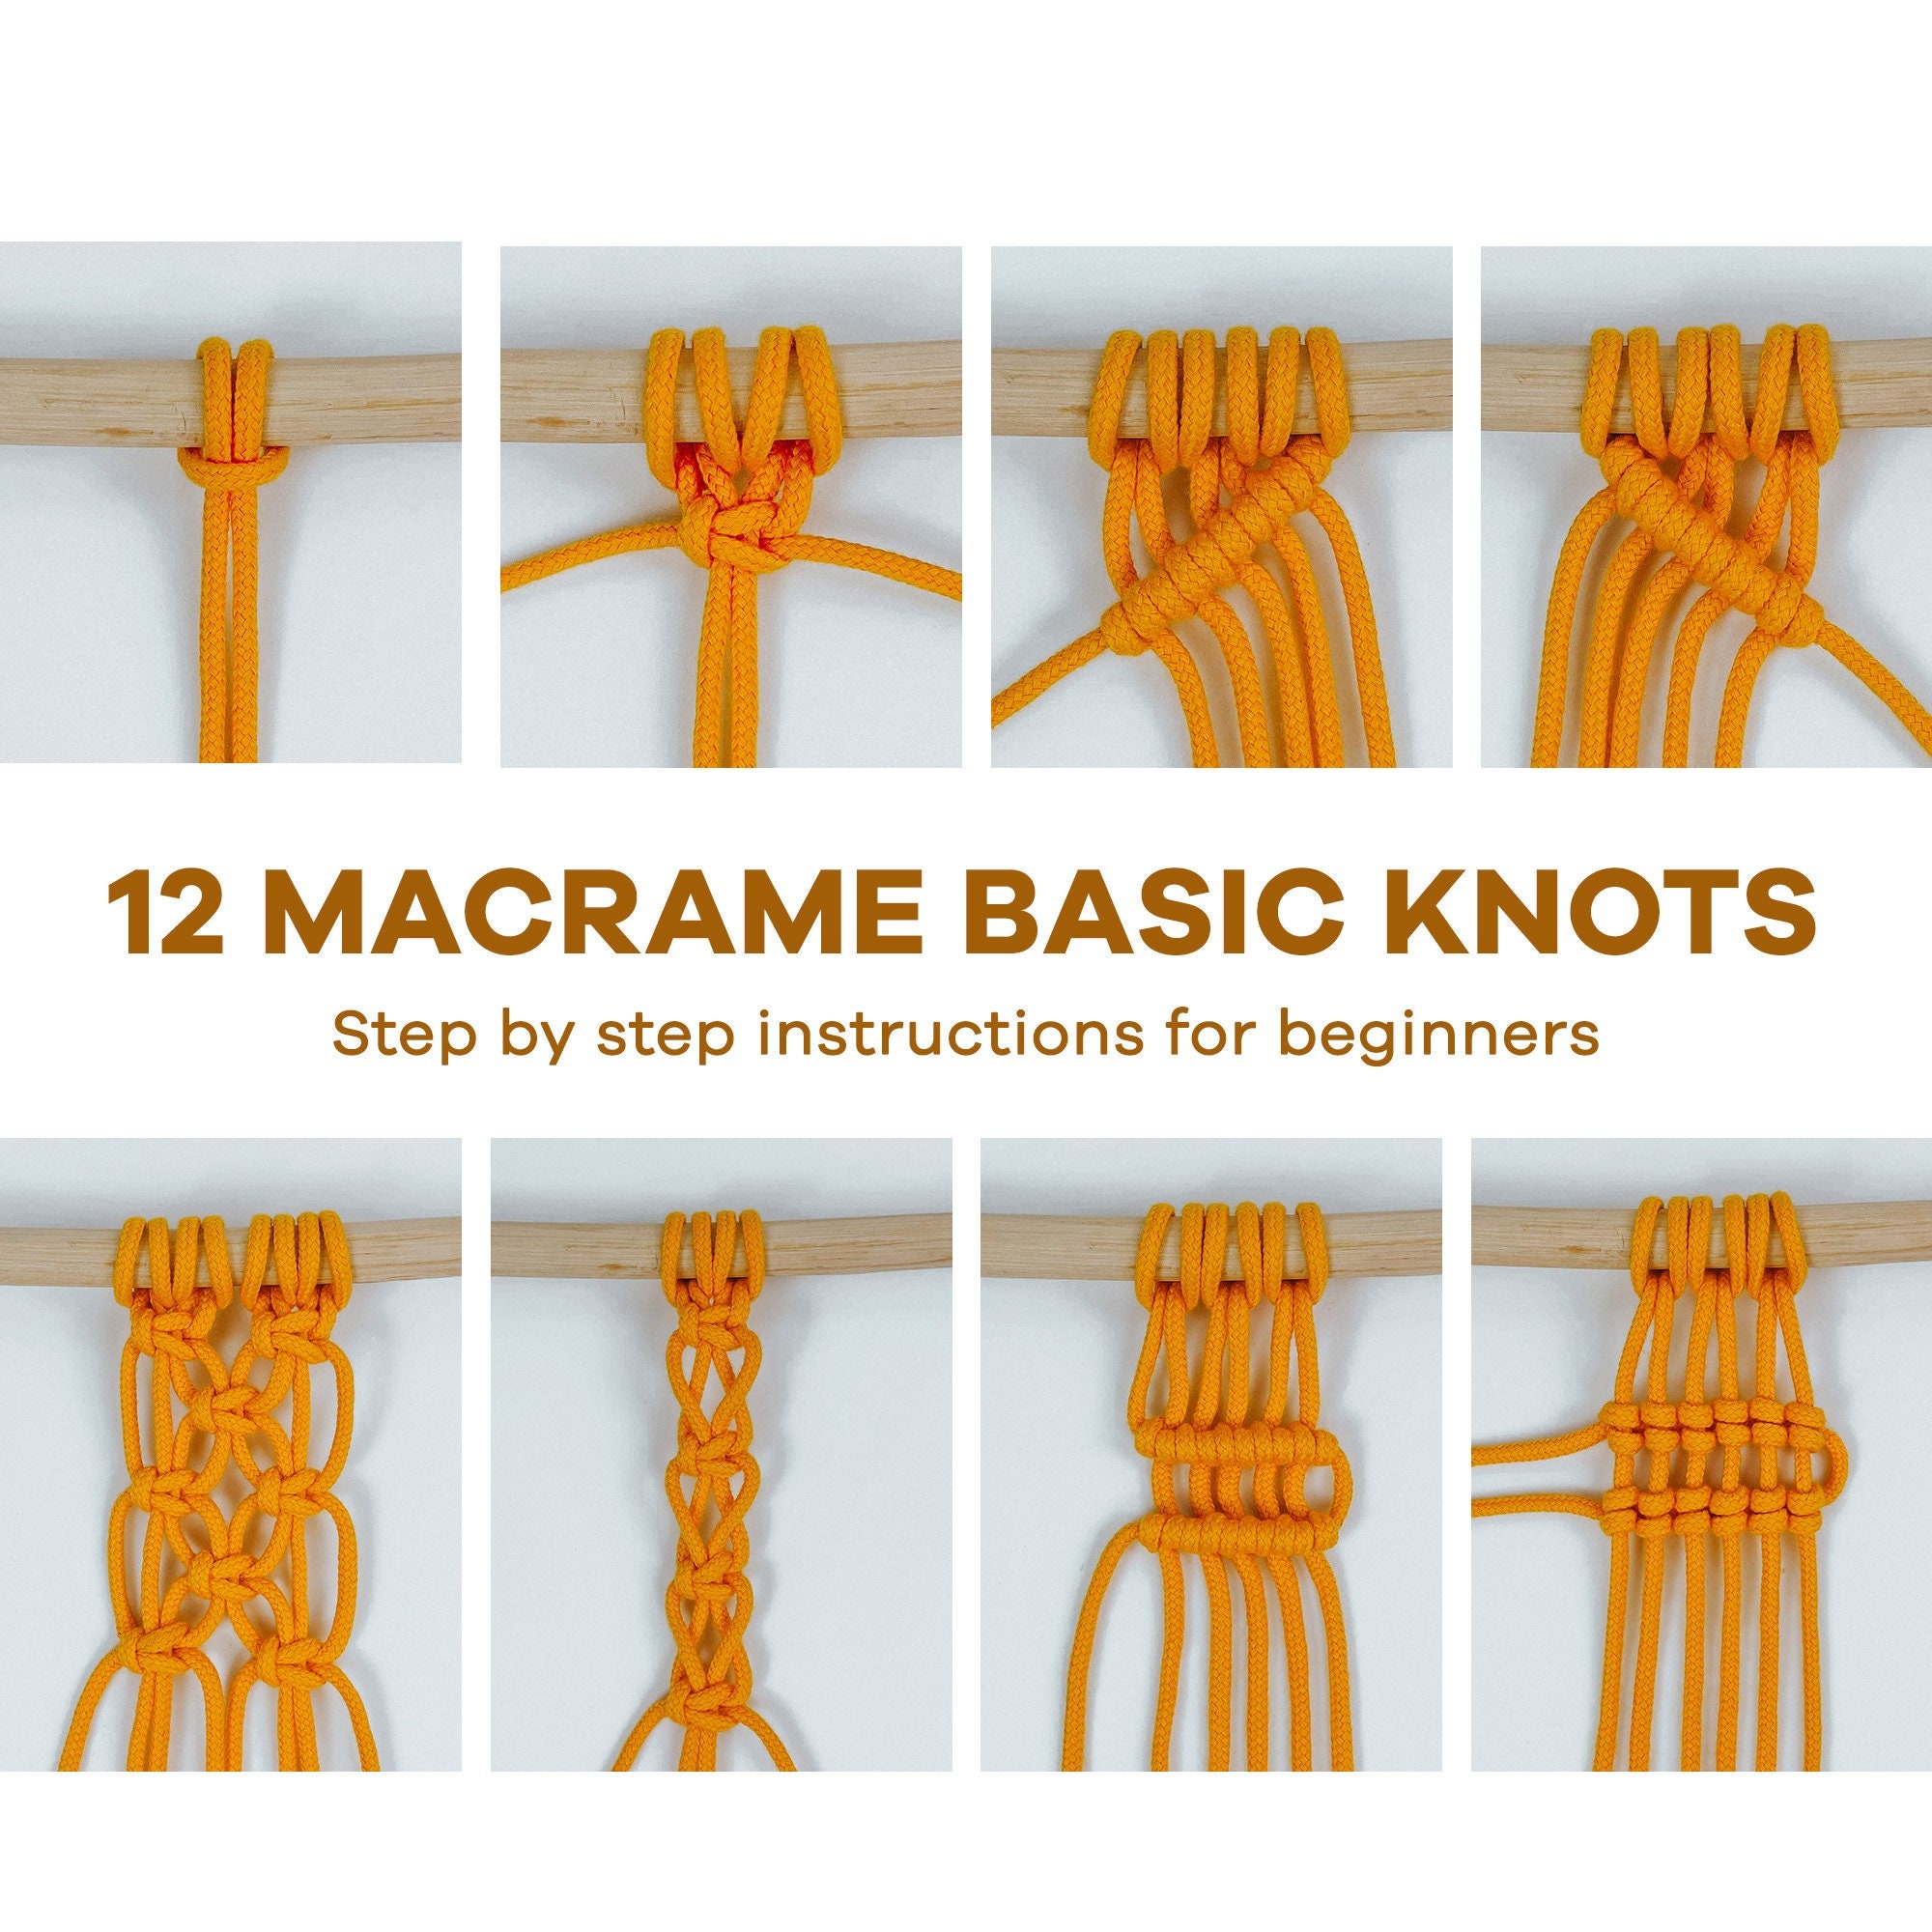 Macramé Books for Adult Beginners: A Step-by-Step Guide to the Macramé  Techniques, Knots and